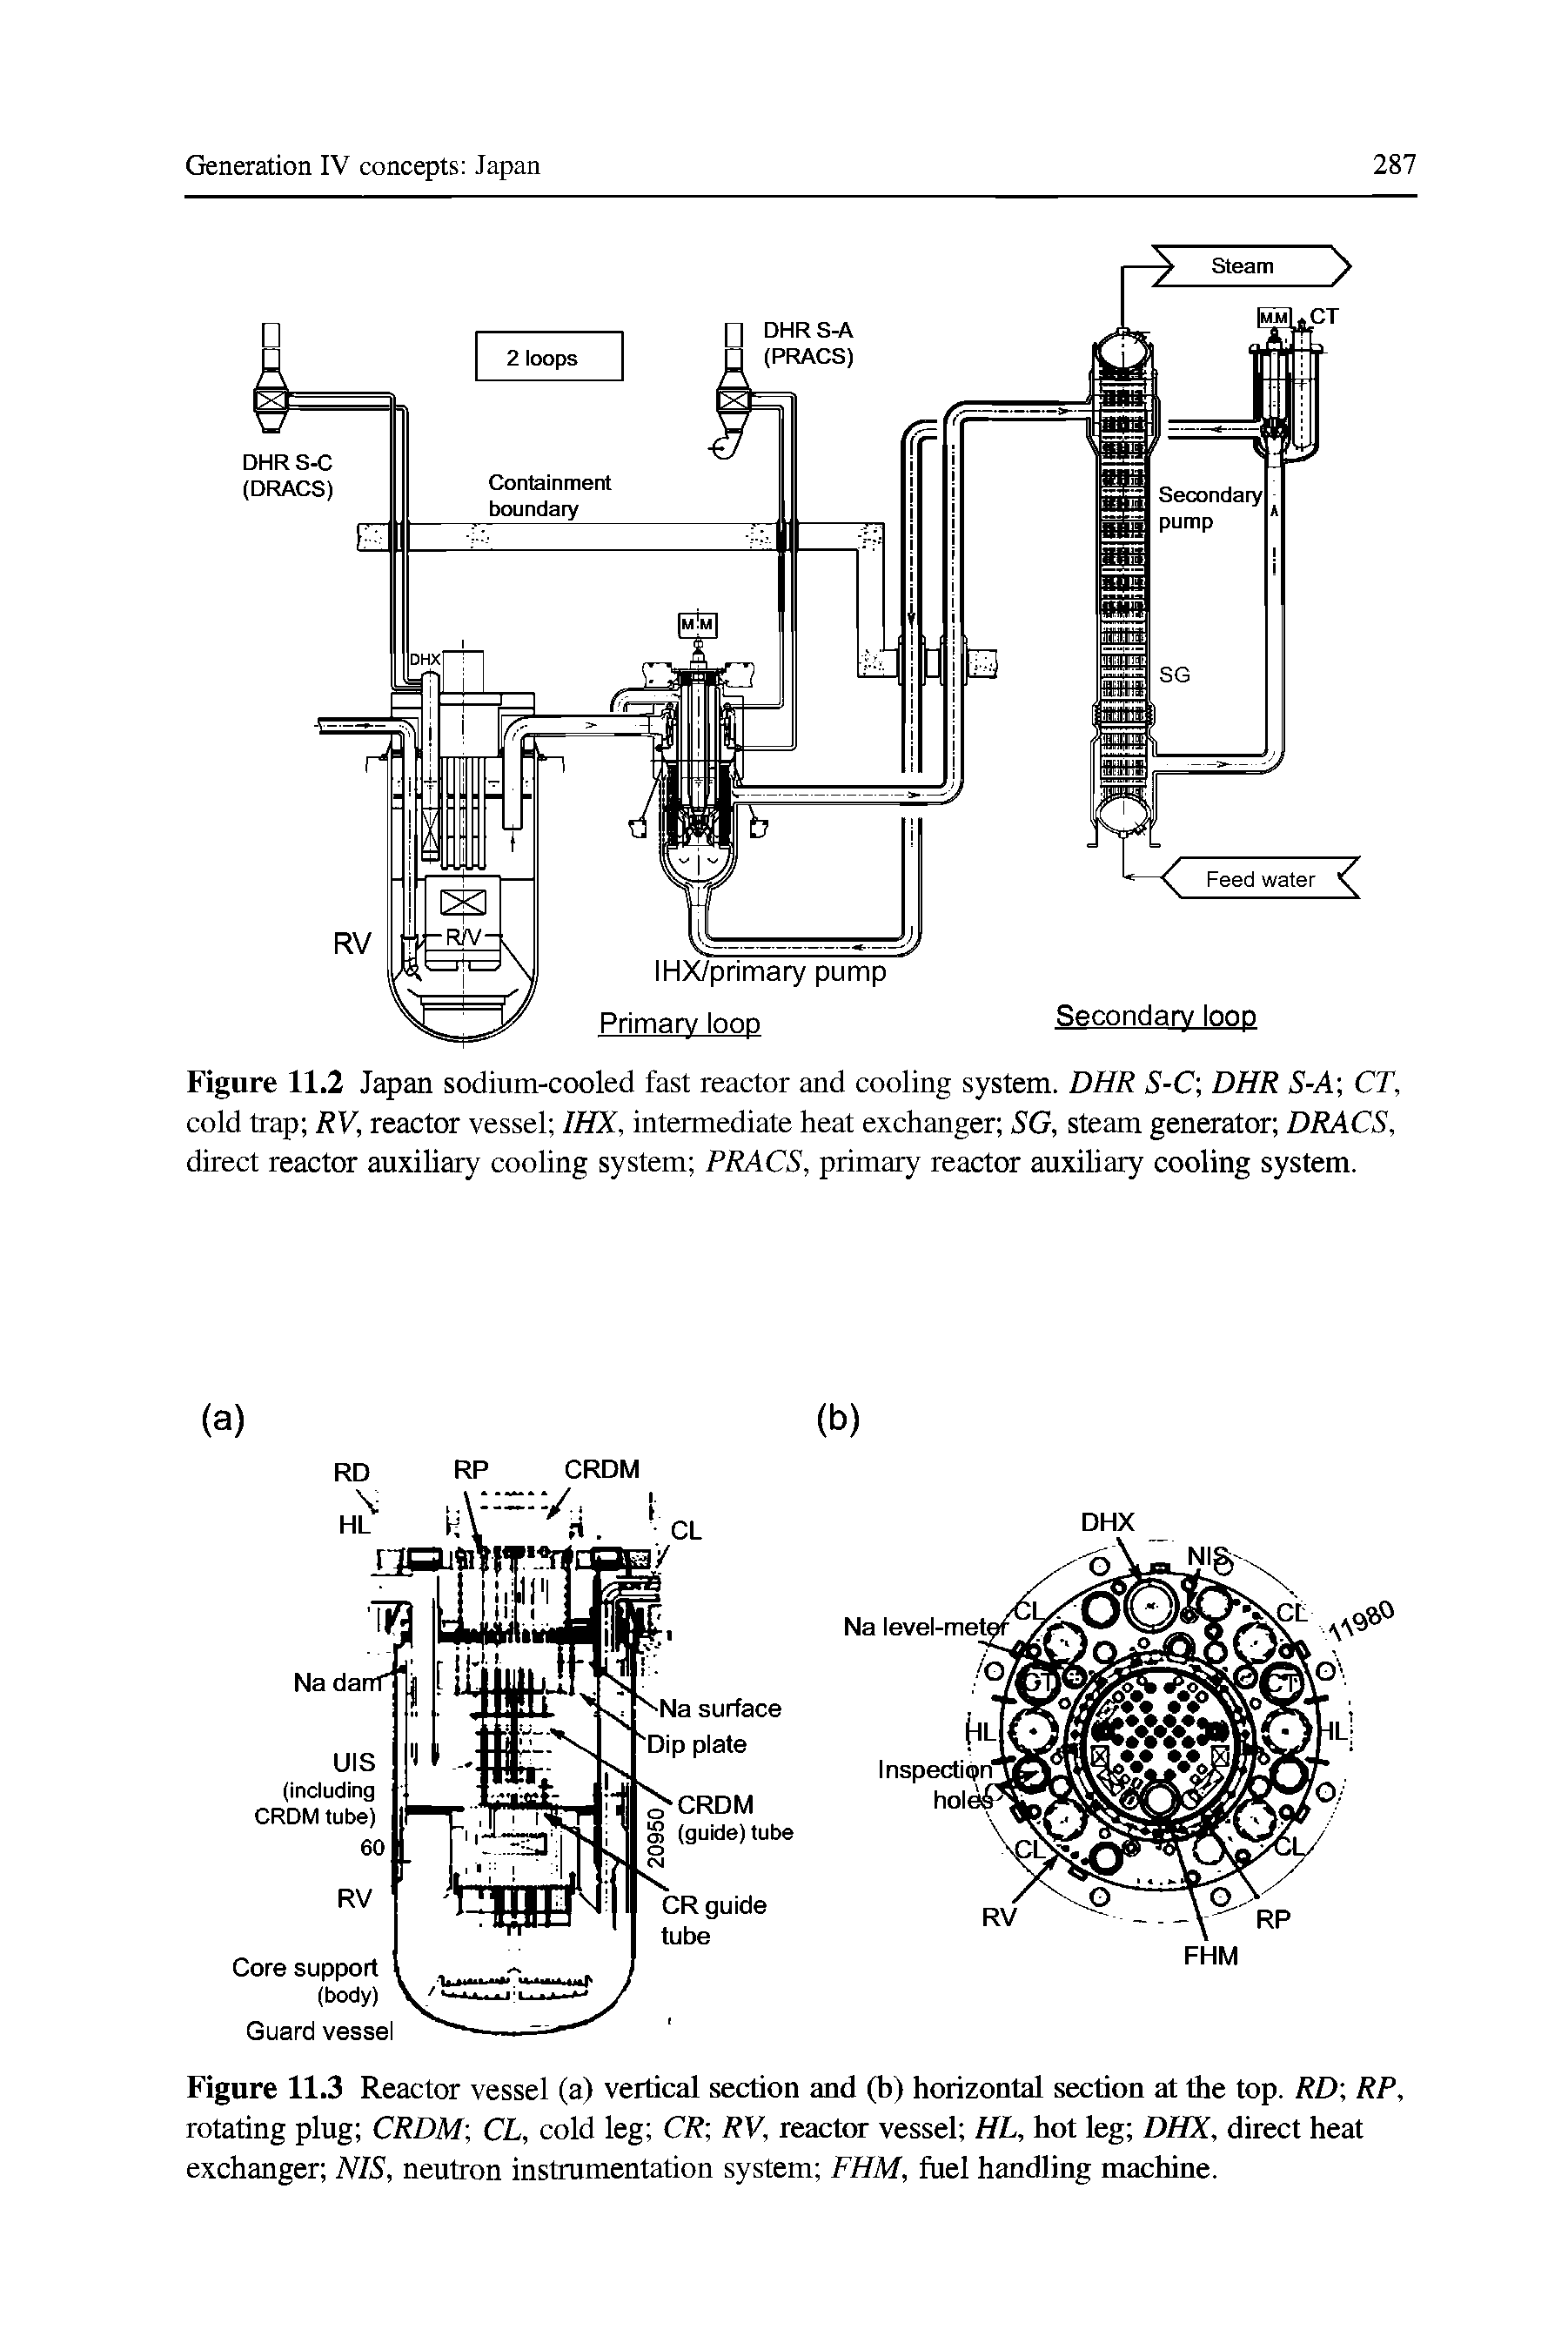 Figure 11.3 Reactor vessel (a) vertical section and (b) horizontal section at the top. RD RP, rotating plug CRDM CL, cold leg CR RV, reactor vessel HL, hot leg DHX, direct heat exchanger NIS, neutron instrumentation system FHM, fuel handling machine.